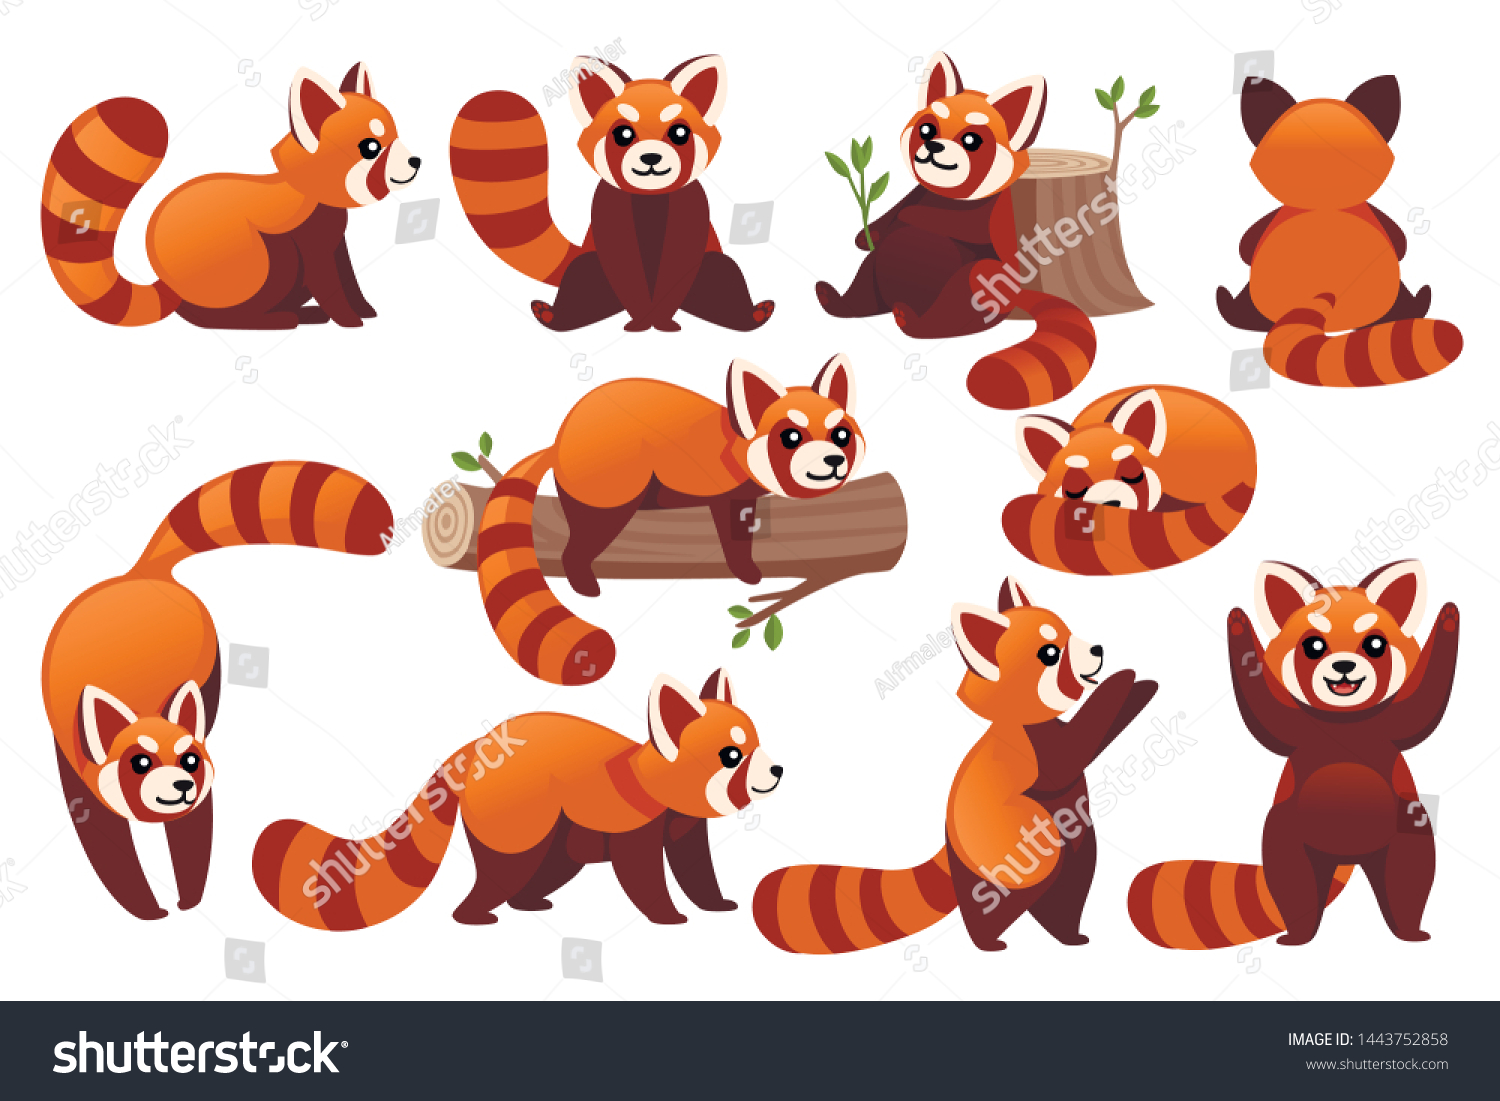 SVG of Set of cute adorable red panda in different poses cartoon design animal character flat vector style illustration on white background svg